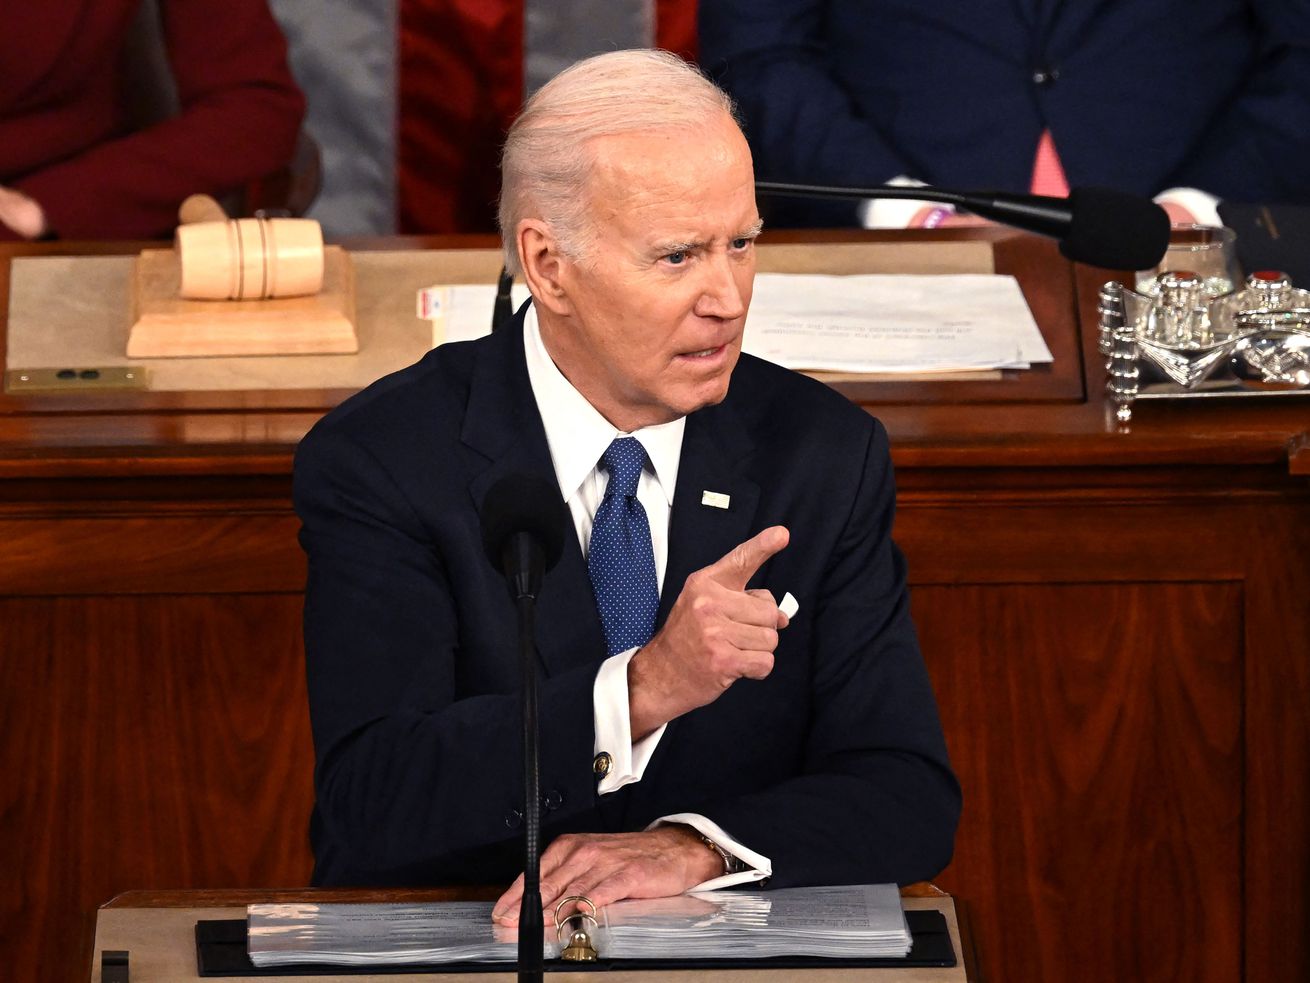 Biden speaks at the State of the Union.